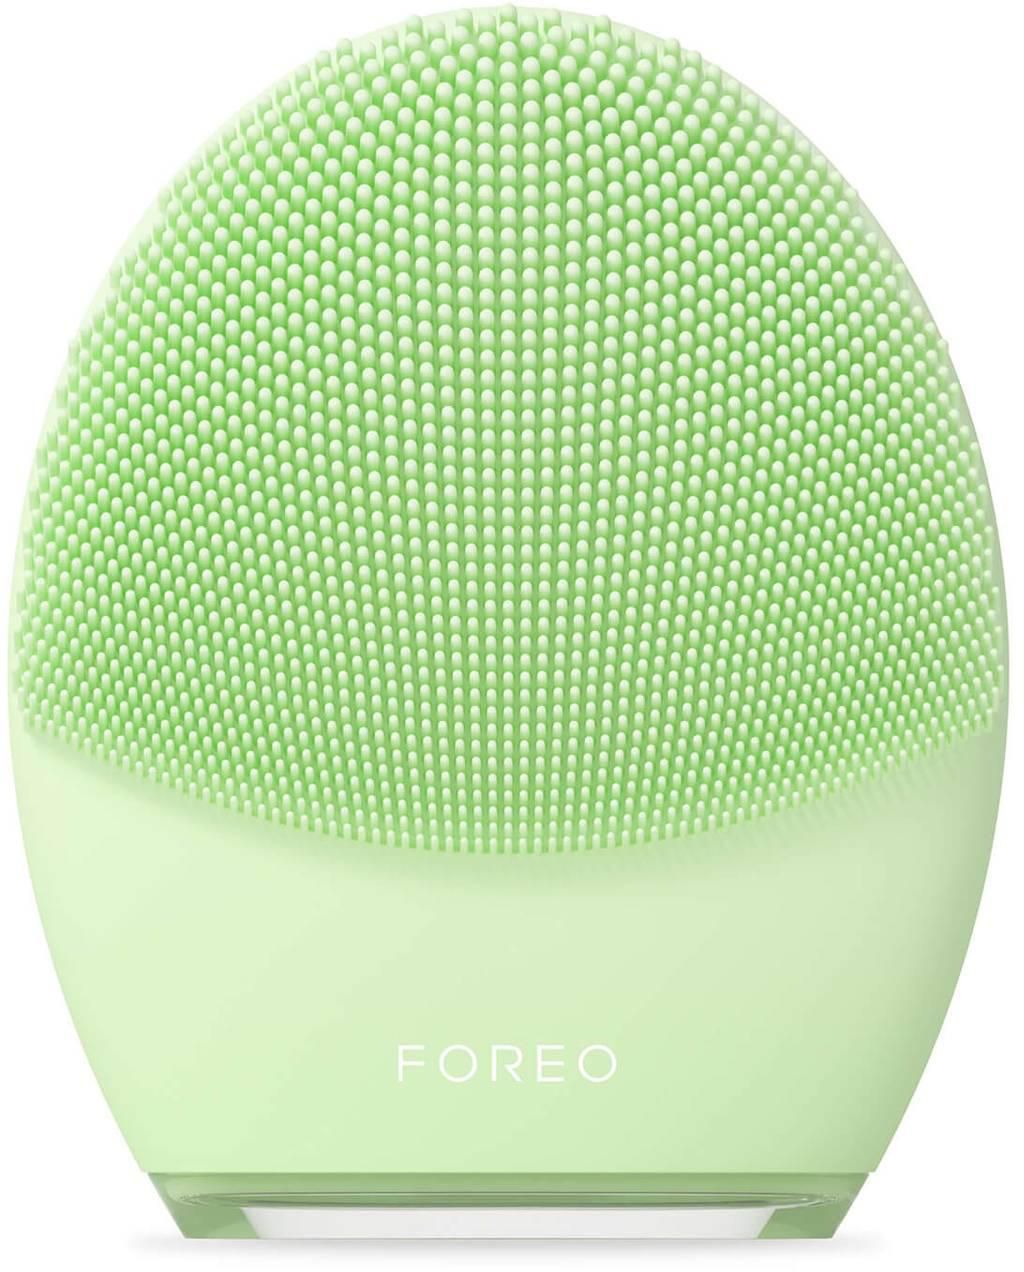 FOREO LUNA 4 Smart Facial Cleansing and Firming Massage Device - Combination Skin